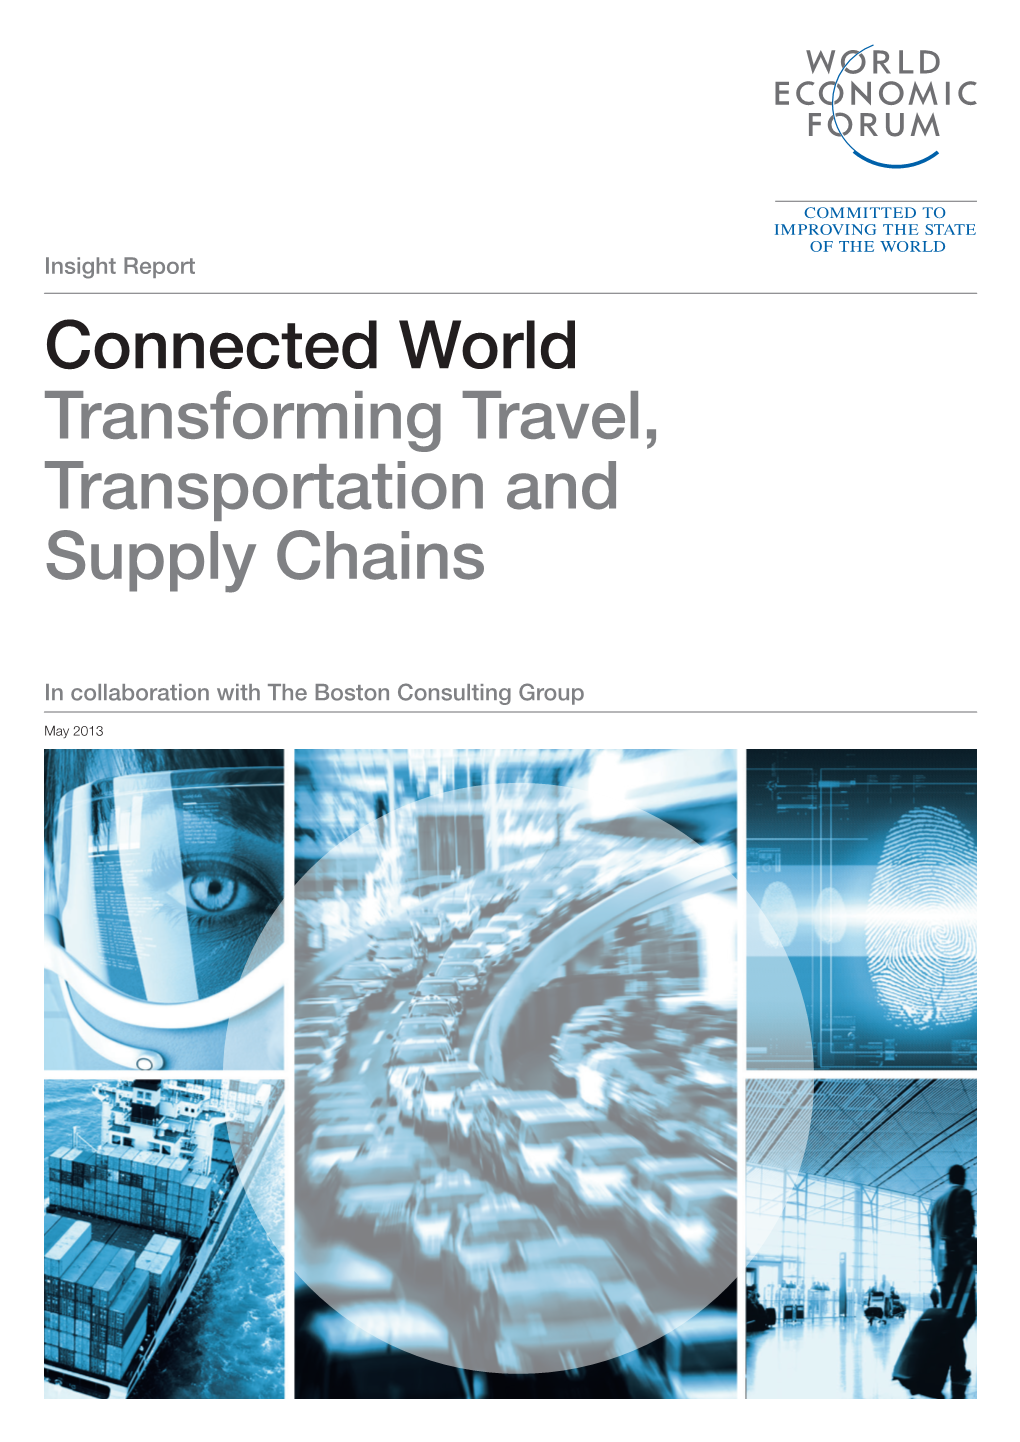 Connected World Transforming Travel, Transportation and Supply Chains